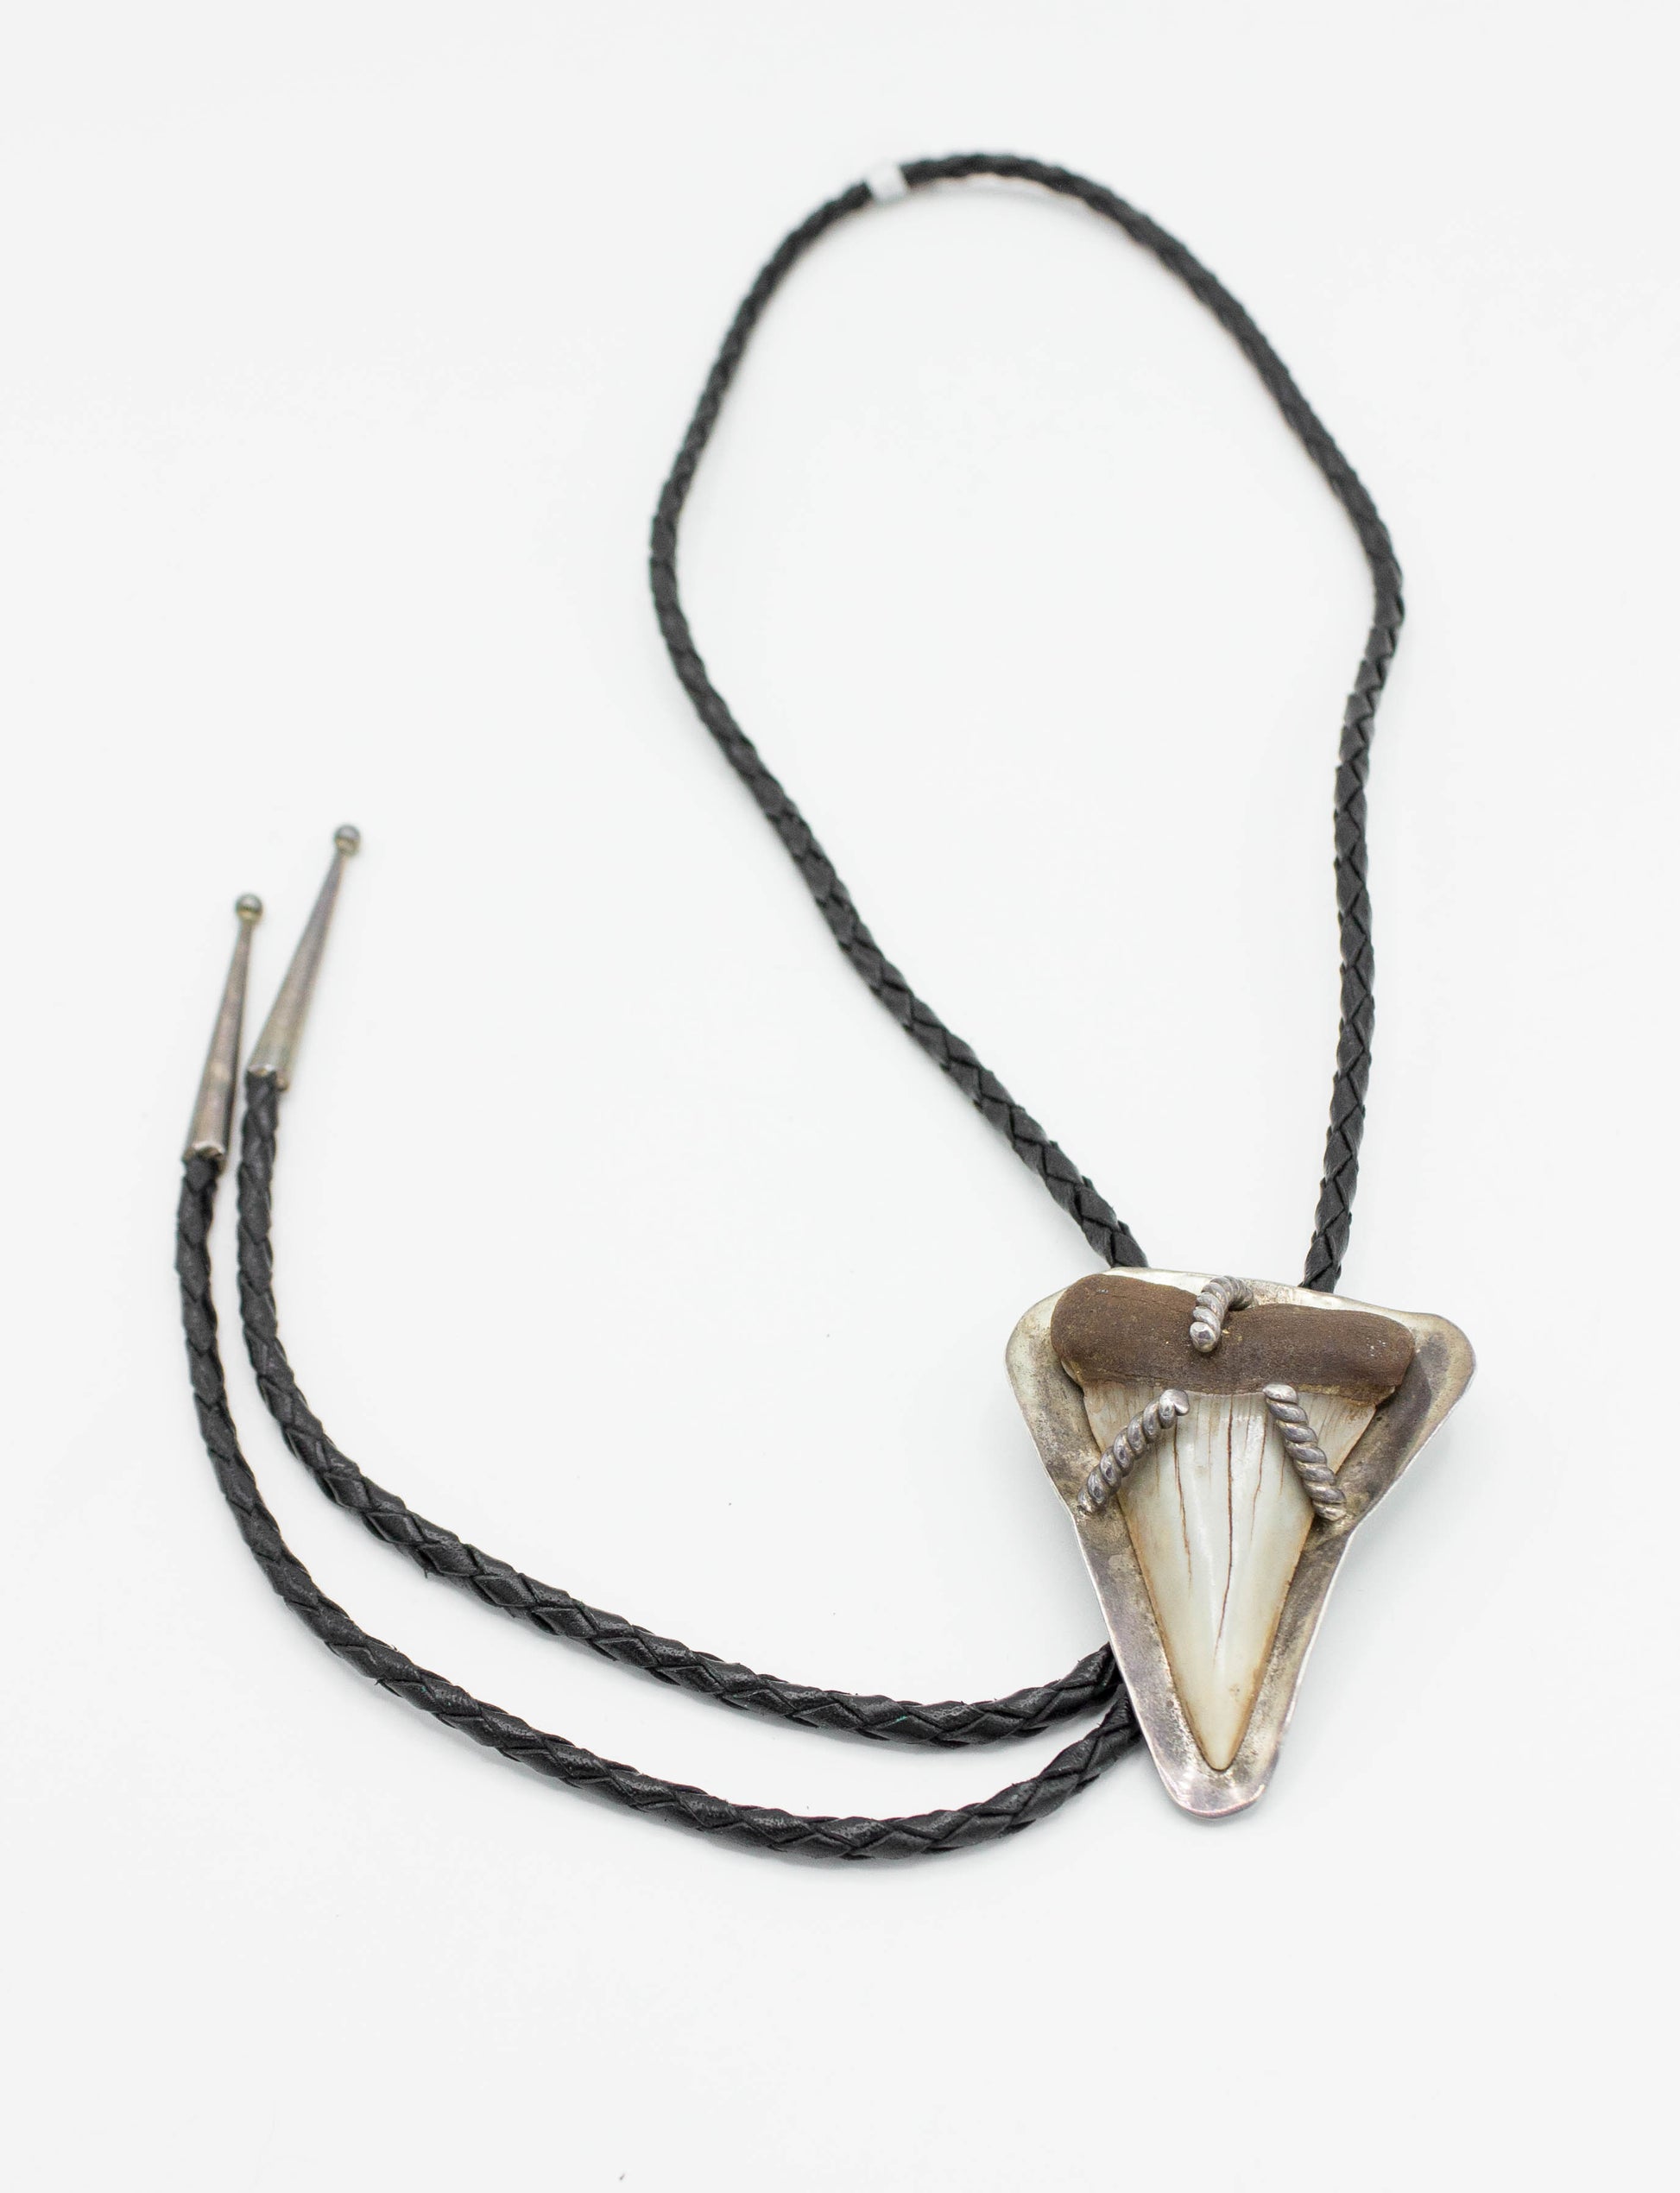 Vintage Shark Tooth and Sterling Silver Bolo Tie With Braided Leather Adjustable